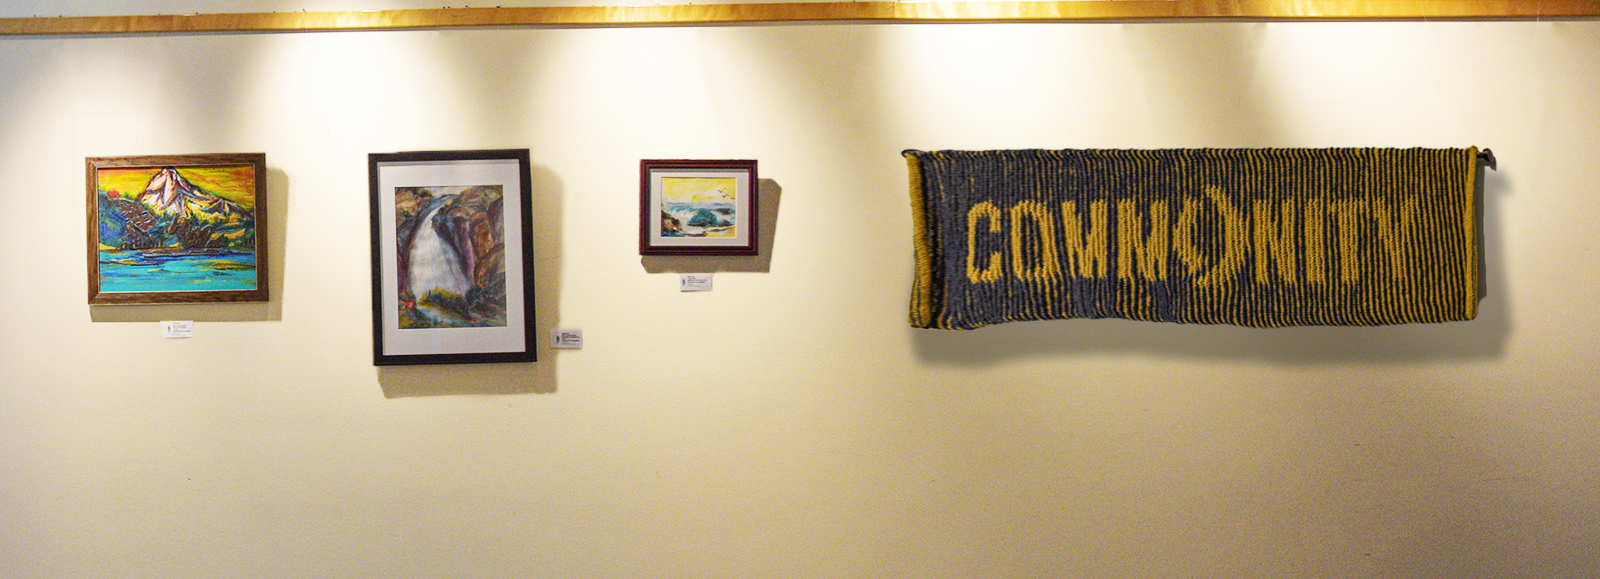 From left to right: watercolor paintings by&amp;nbsp;Qinqin Liu, Ph.D. ’90, and an illusion knit piece by&amp;nbsp;Gerry Elizondo ’98.